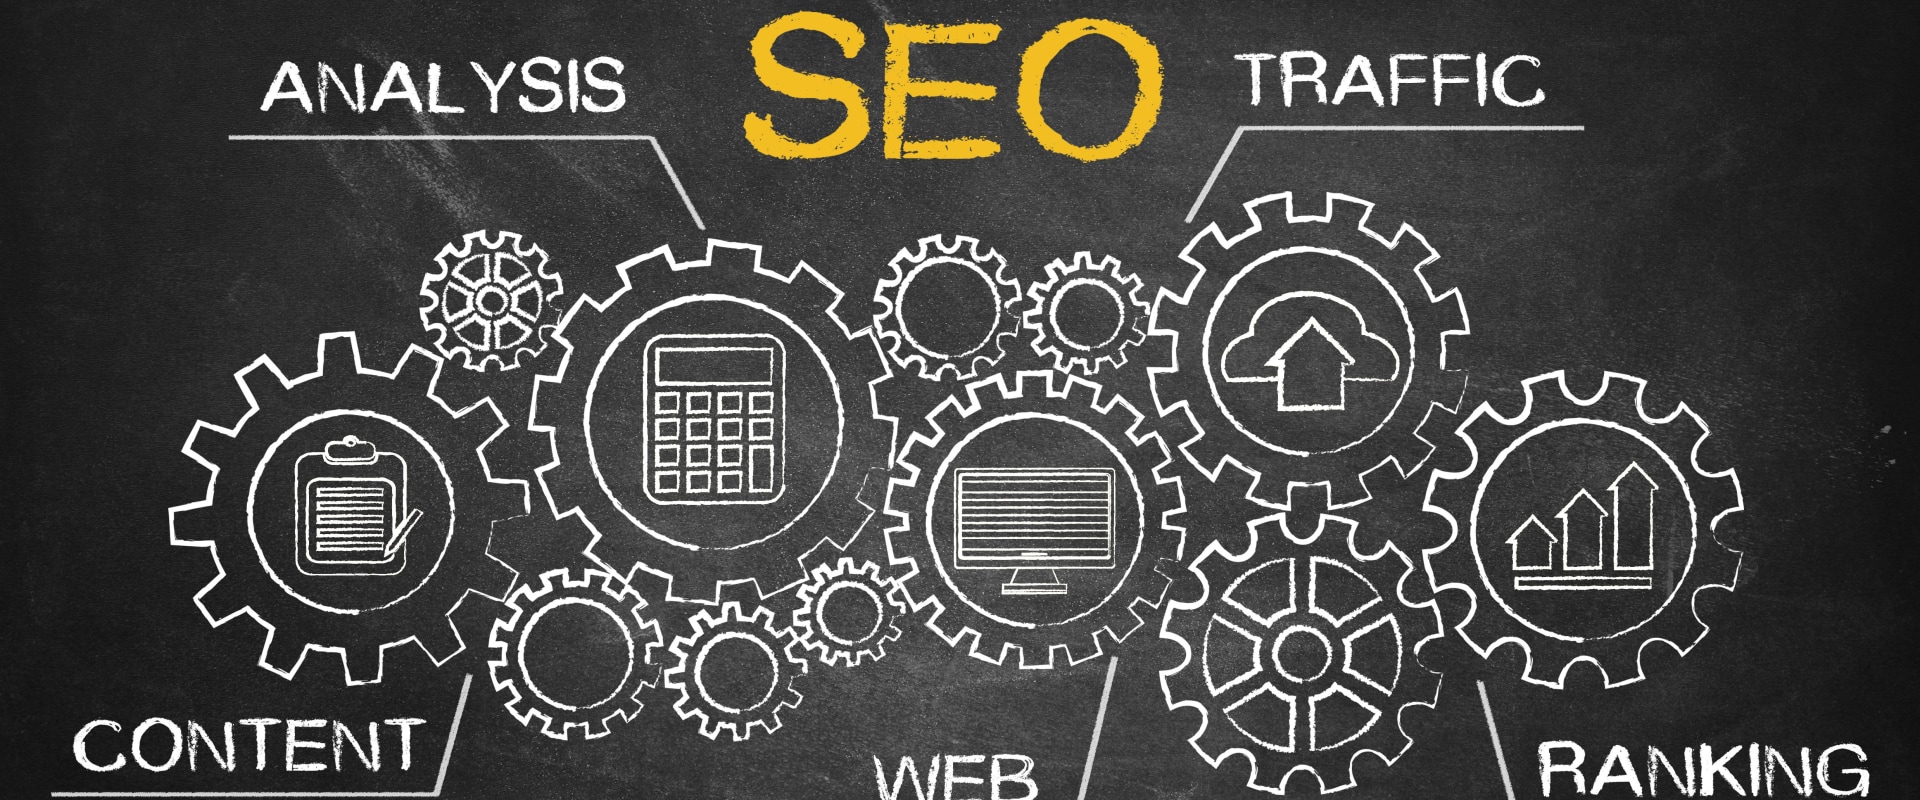 What businesses should use seo?